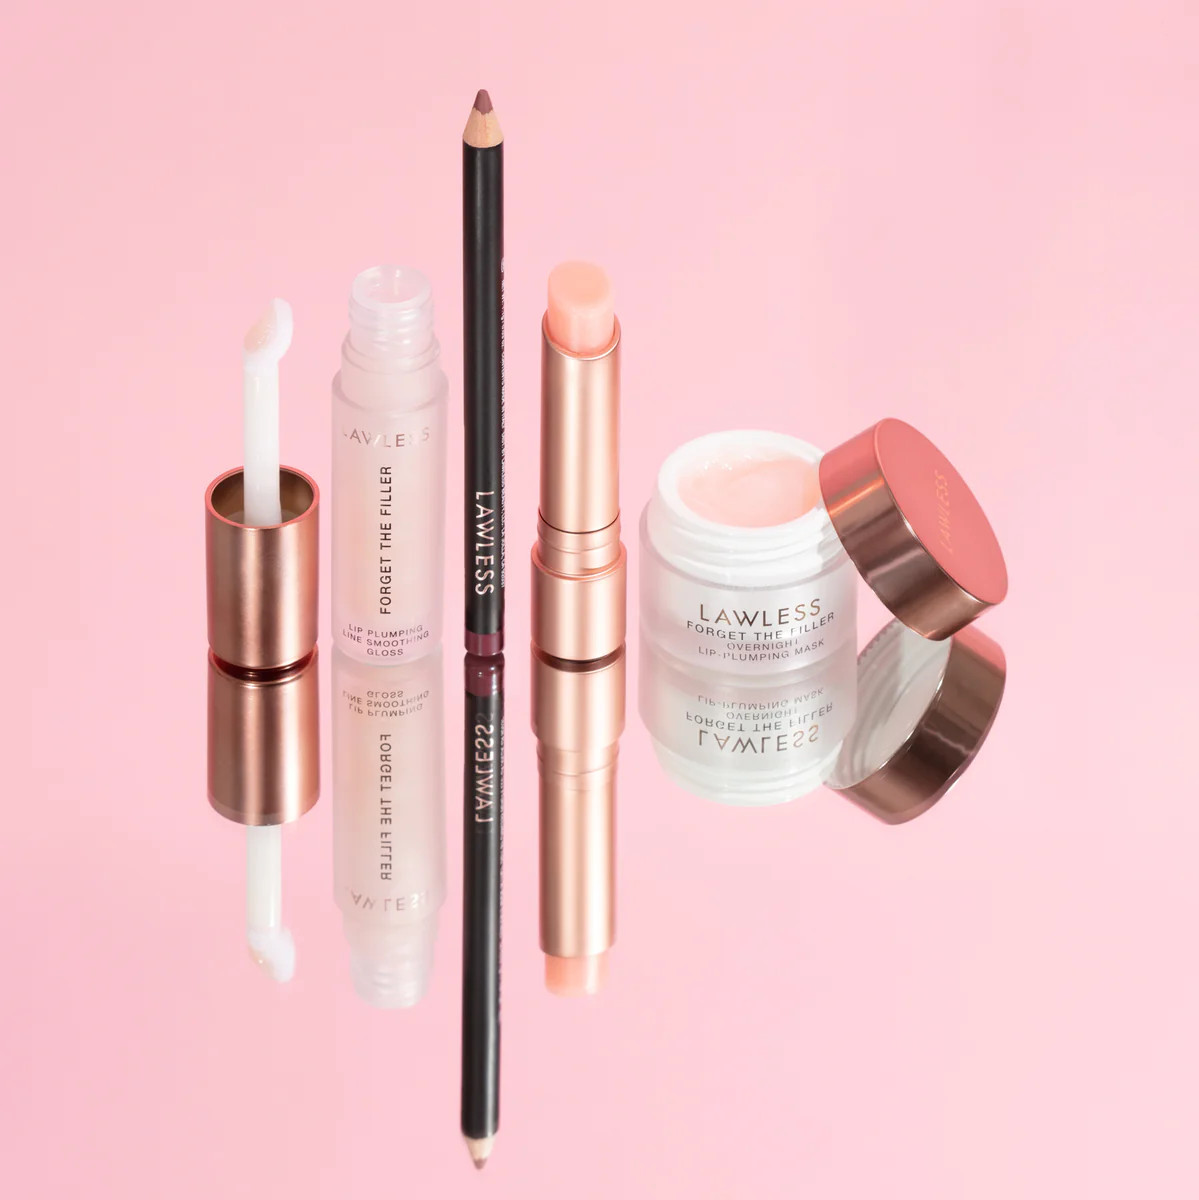 Forget the Filler Bundle | Lawless Beauty